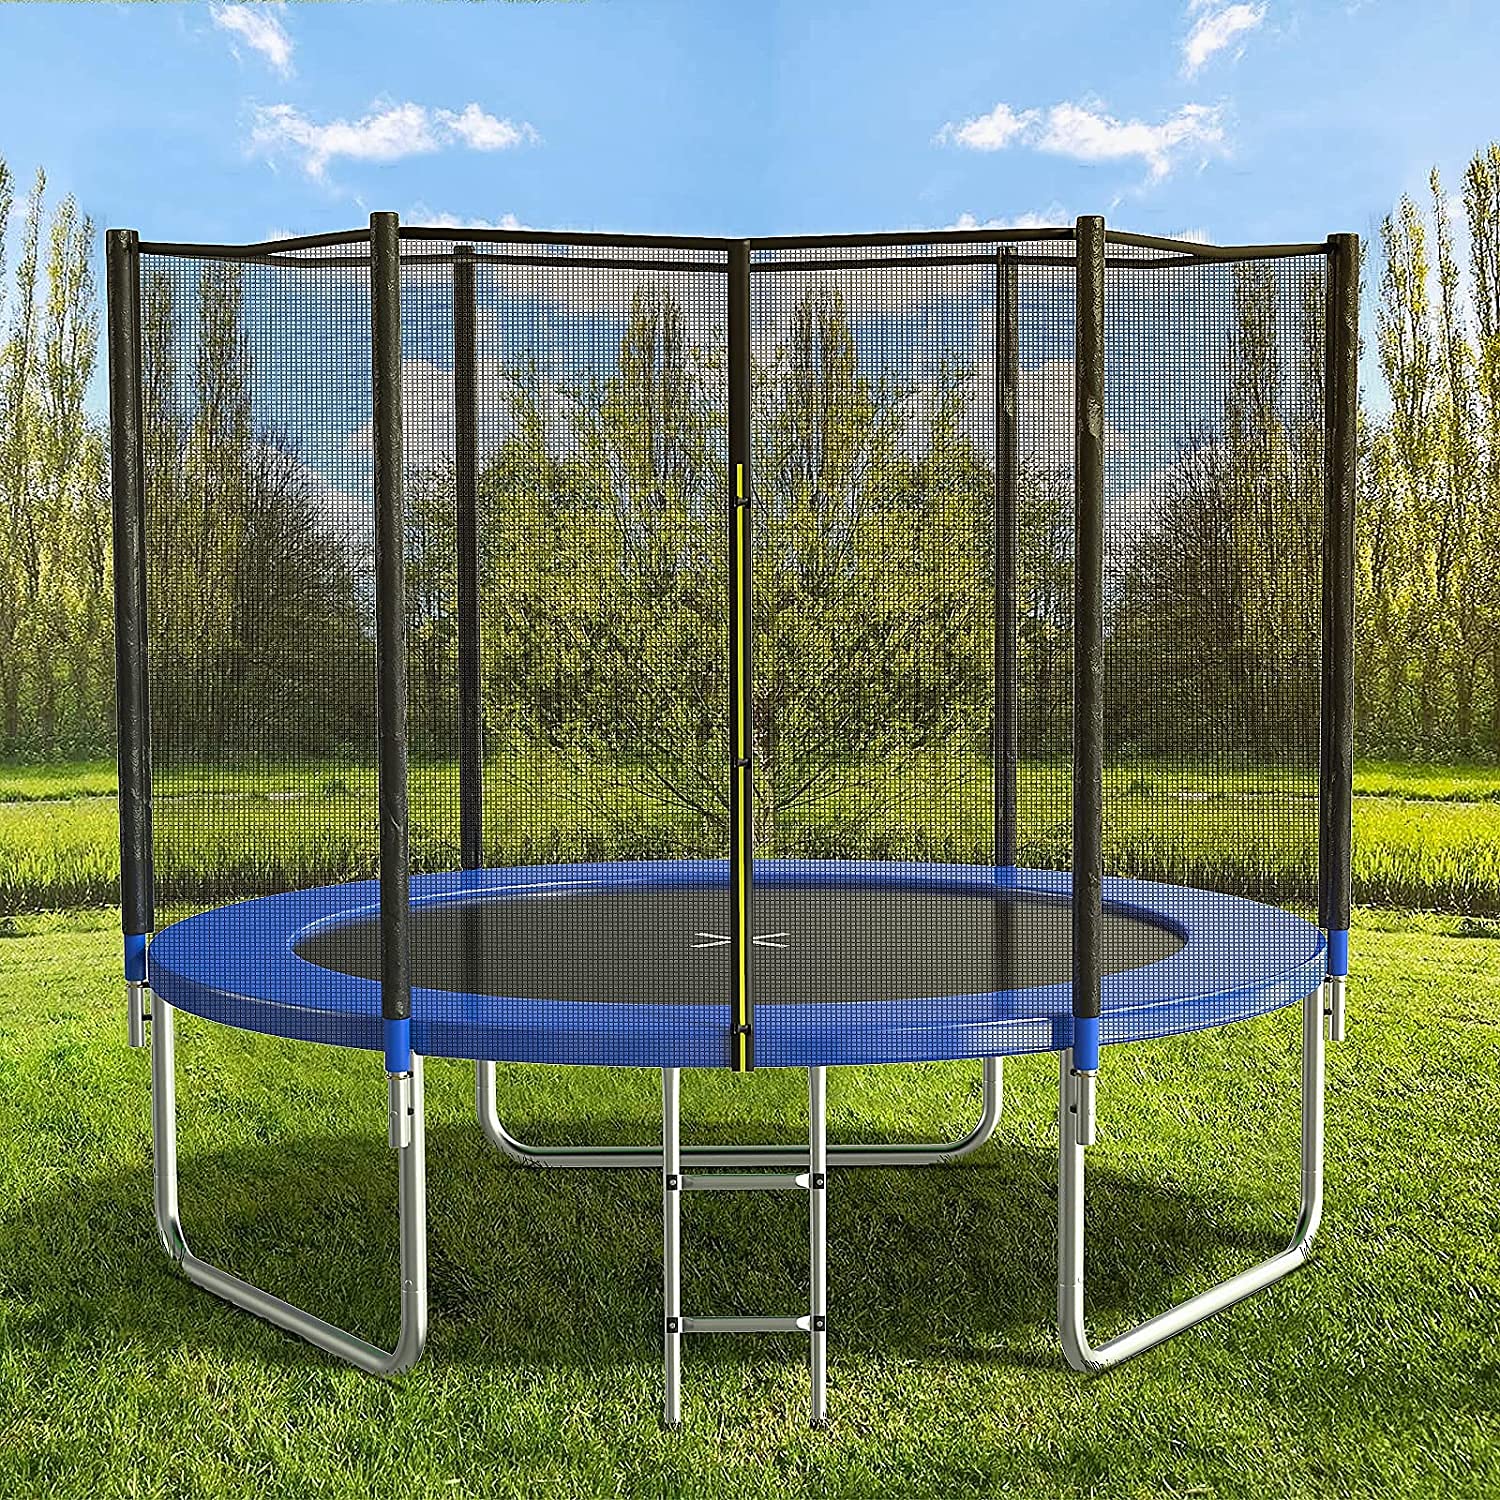 AOTOB 8FT 10FT 12FT 14 FT 15FT Trampoline with Safety Enclosure Net，Outdoor Trampoline with Basketball Hoop, Heavy Duty Jumping Mat and Spring Cover Padding for Kids and Adults, Storage Bag and Ladder